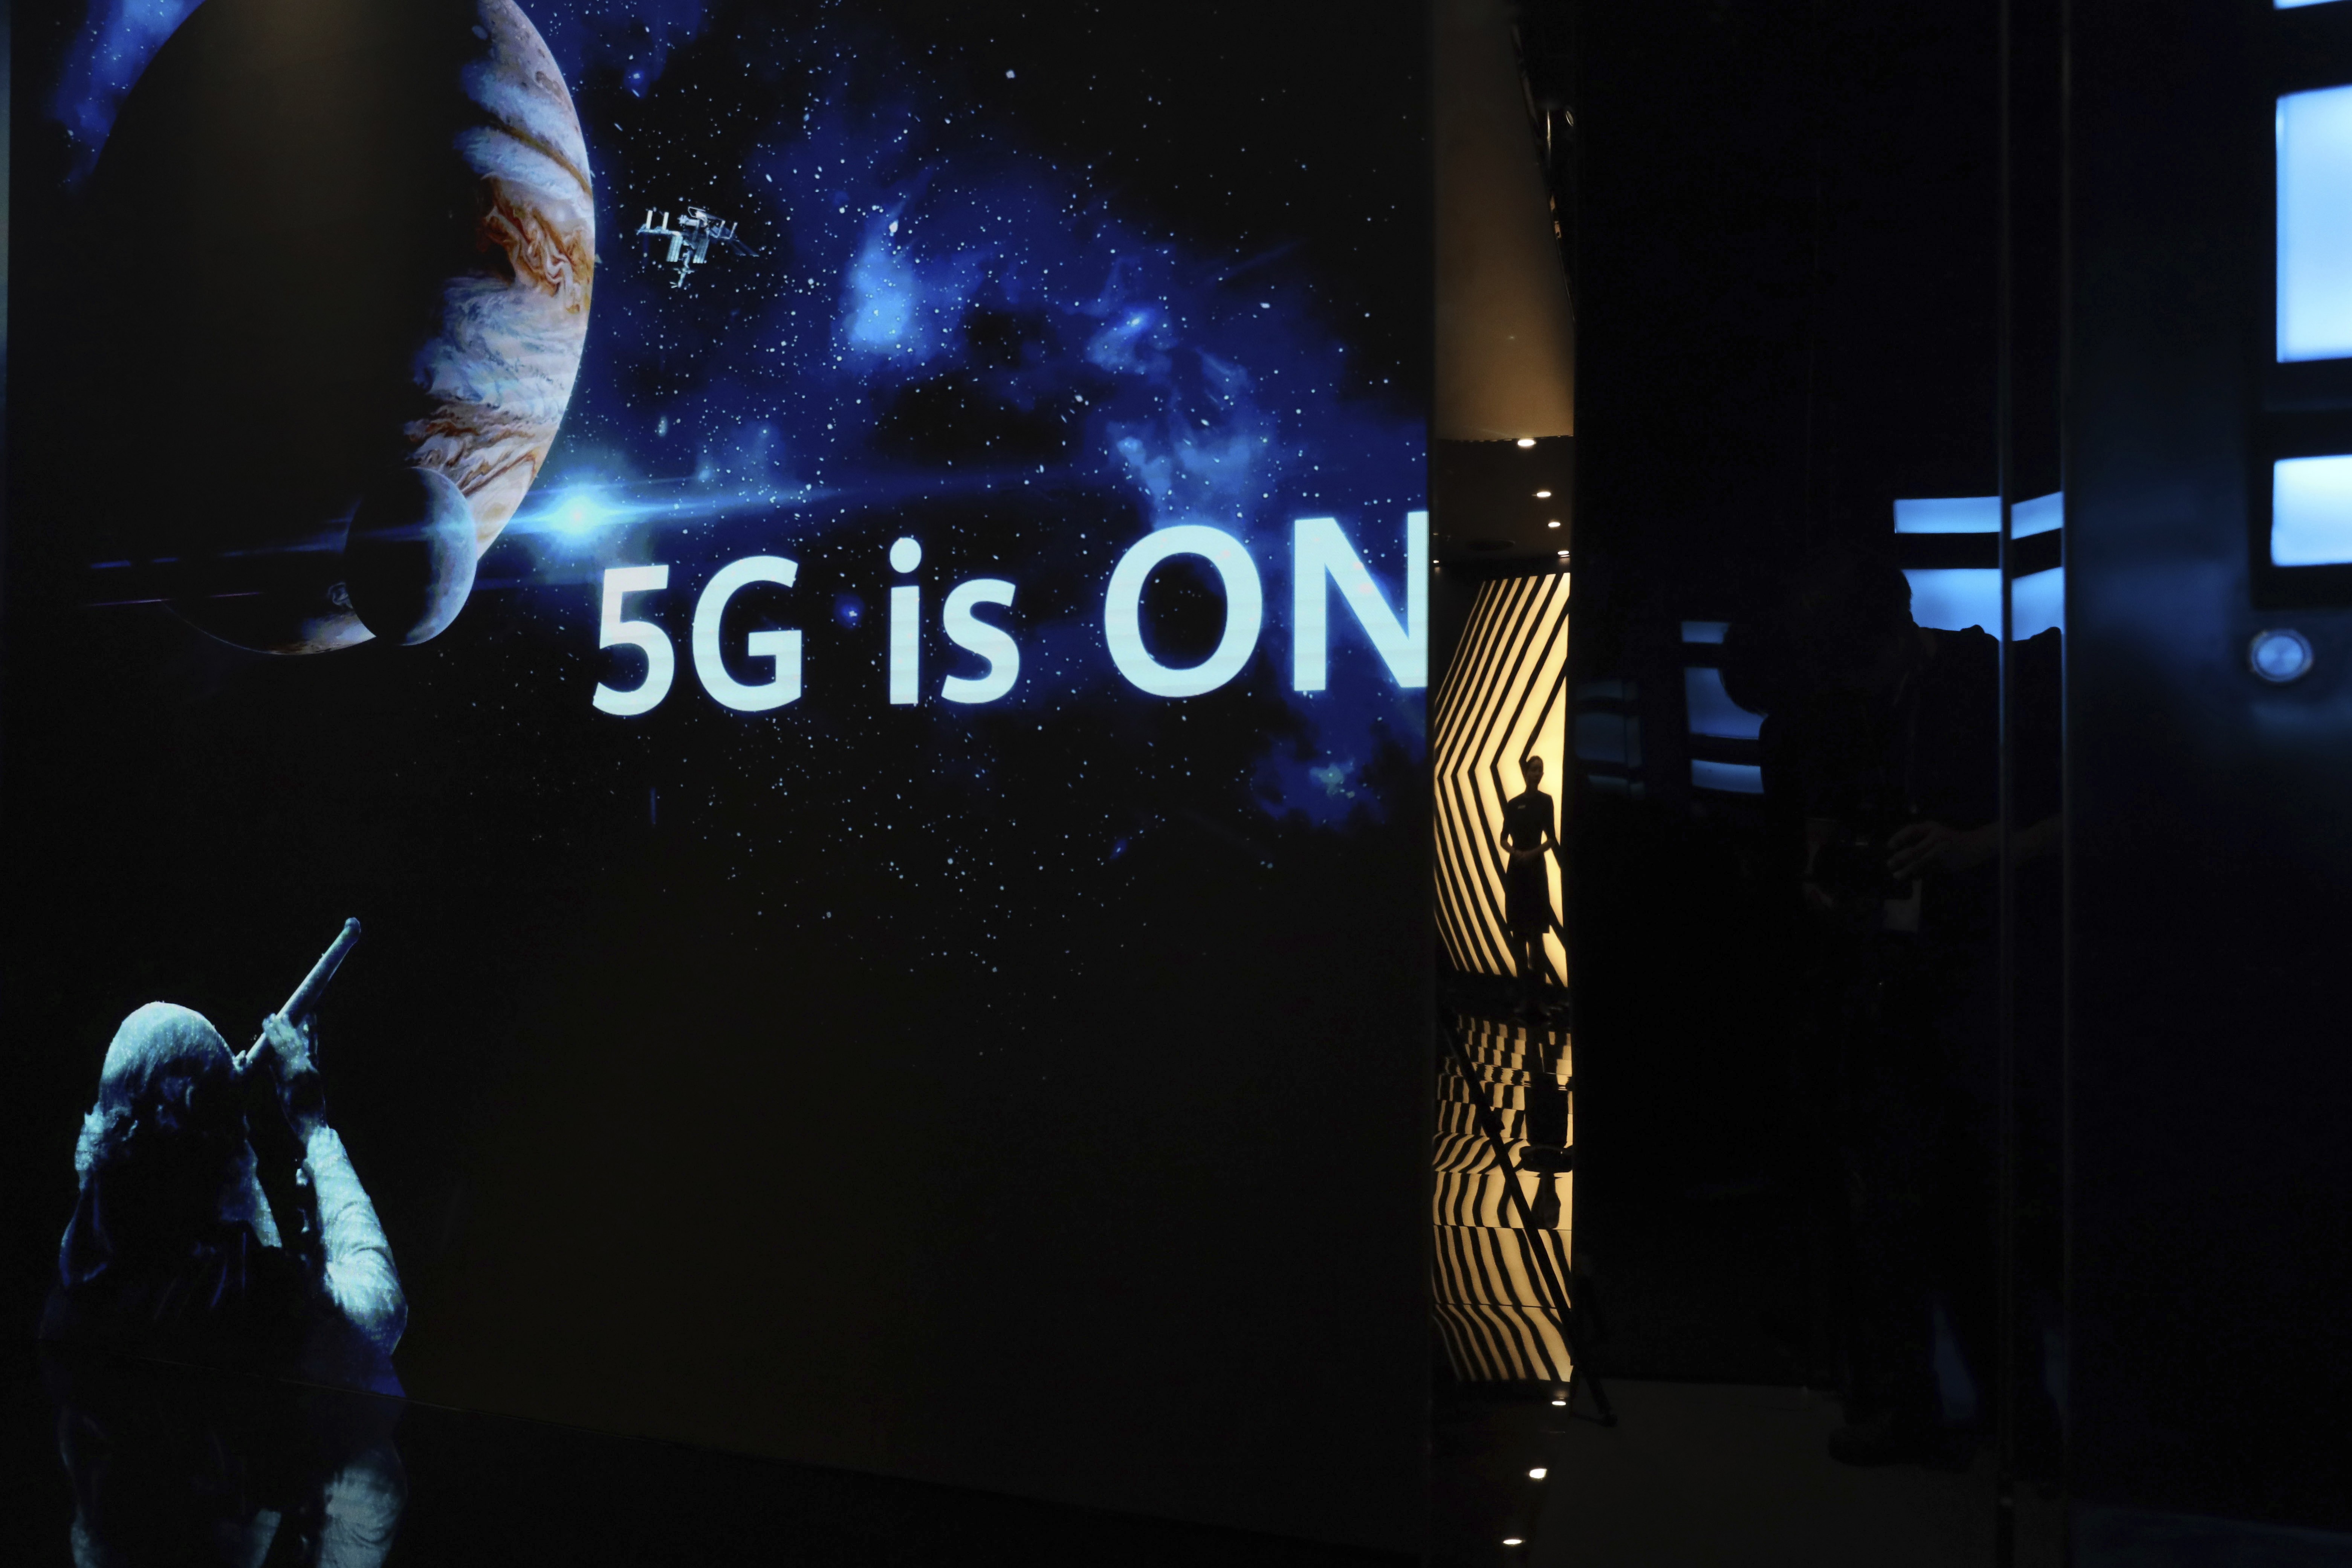 A guide is silhouetted in an exhibition promoting Huawei's 5G technologies in Shenzhen, China. Photo: AP